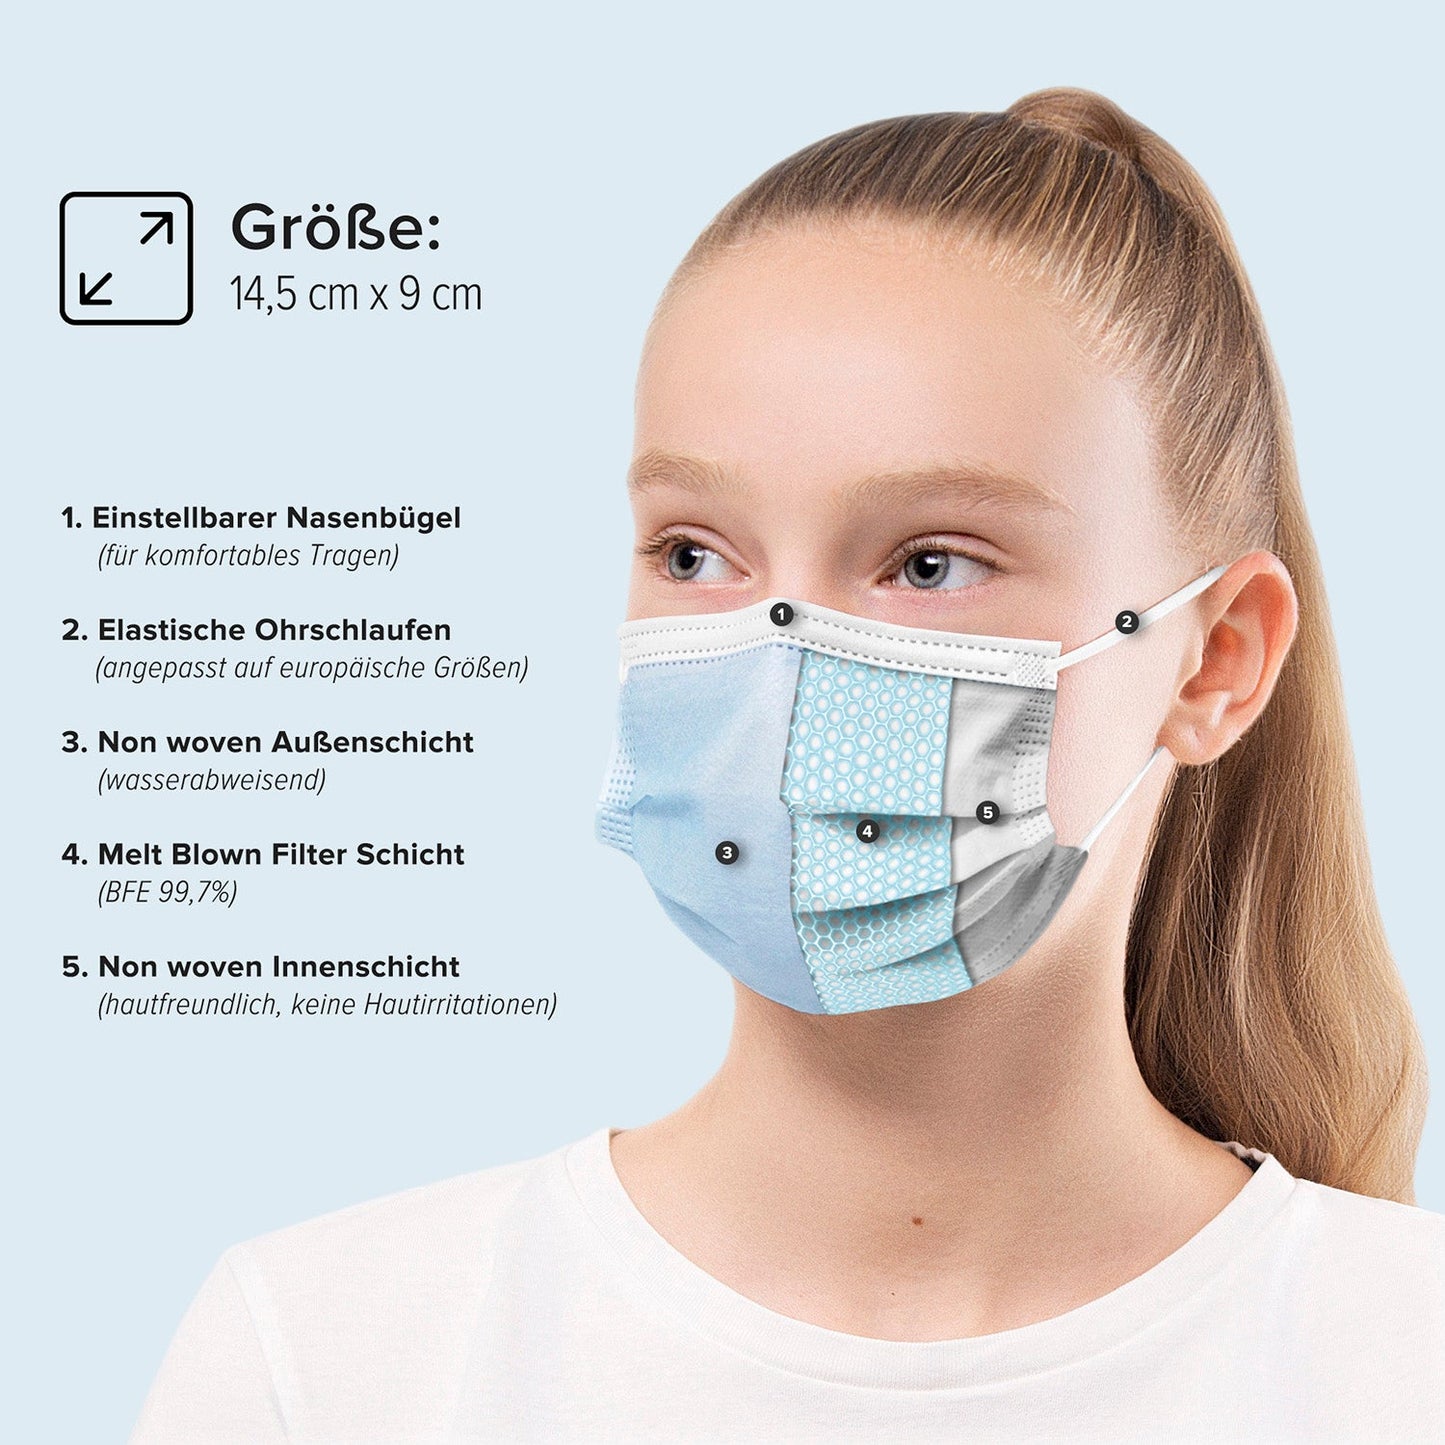 Hard 50x medical mouth protection for children CE certified according to EN14683